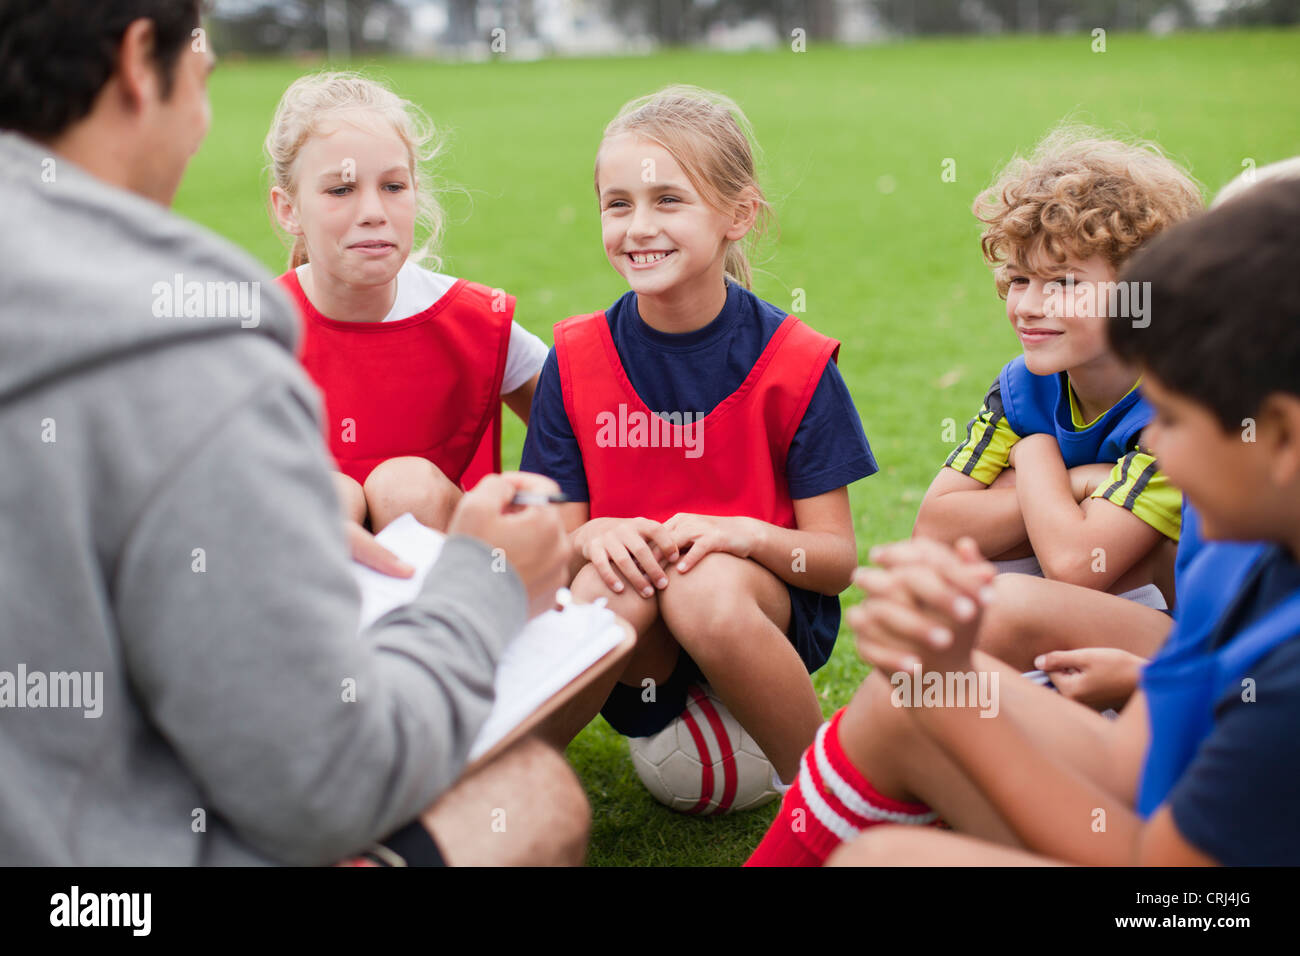 Coach talking to childrens soccer team Stock Photo